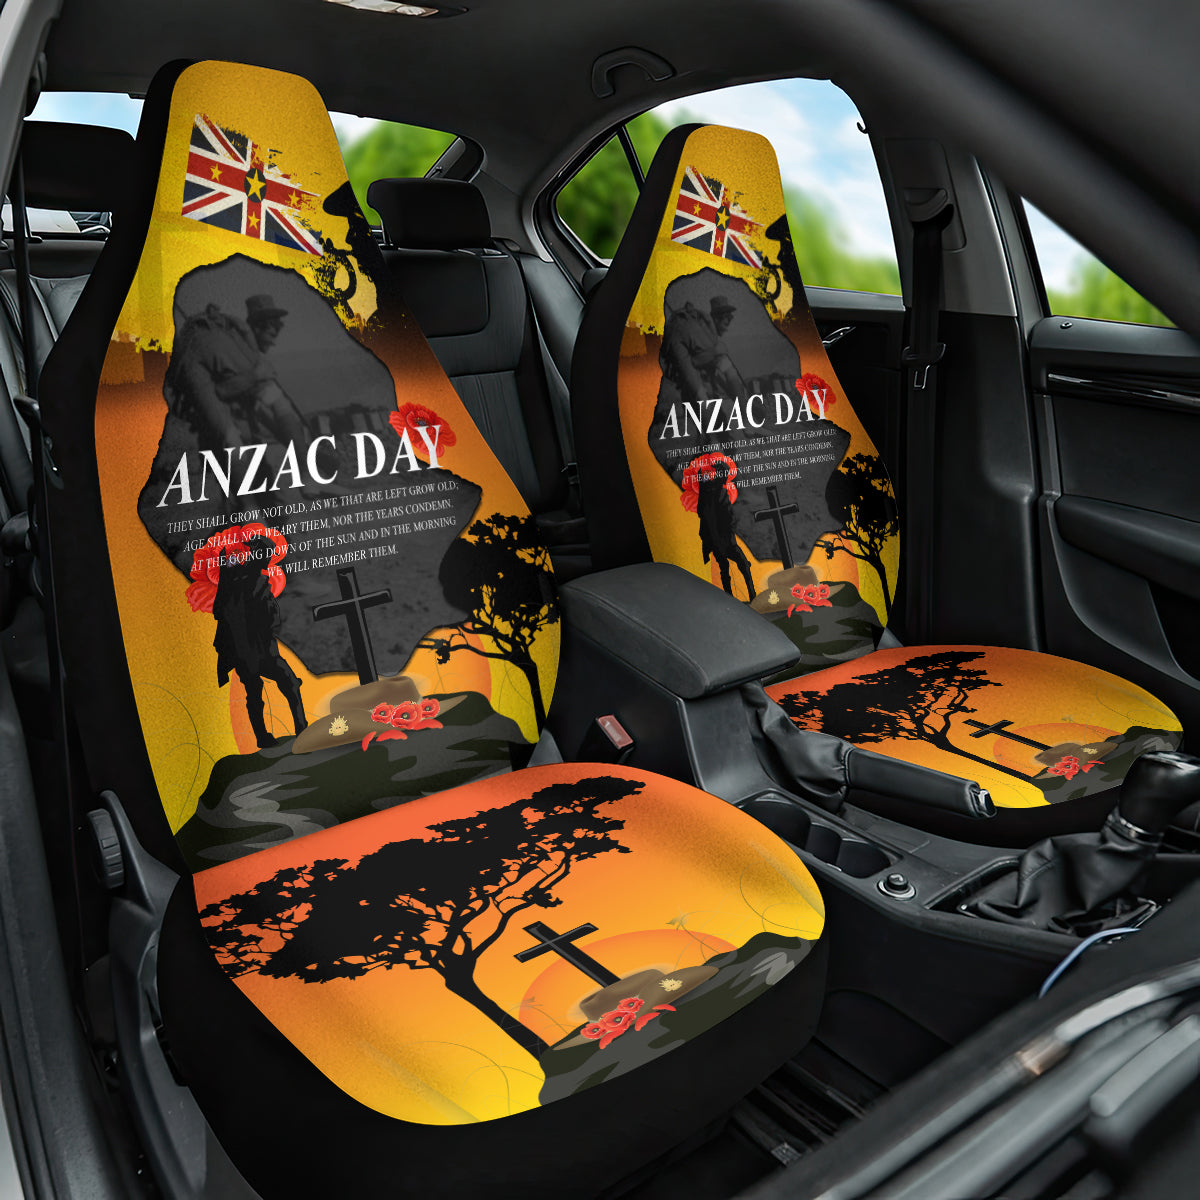 Niue ANZAC Day Car Seat Cover Soldier and Gallipoli Lest We Forget LT03 One Size Yellow - Polynesian Pride